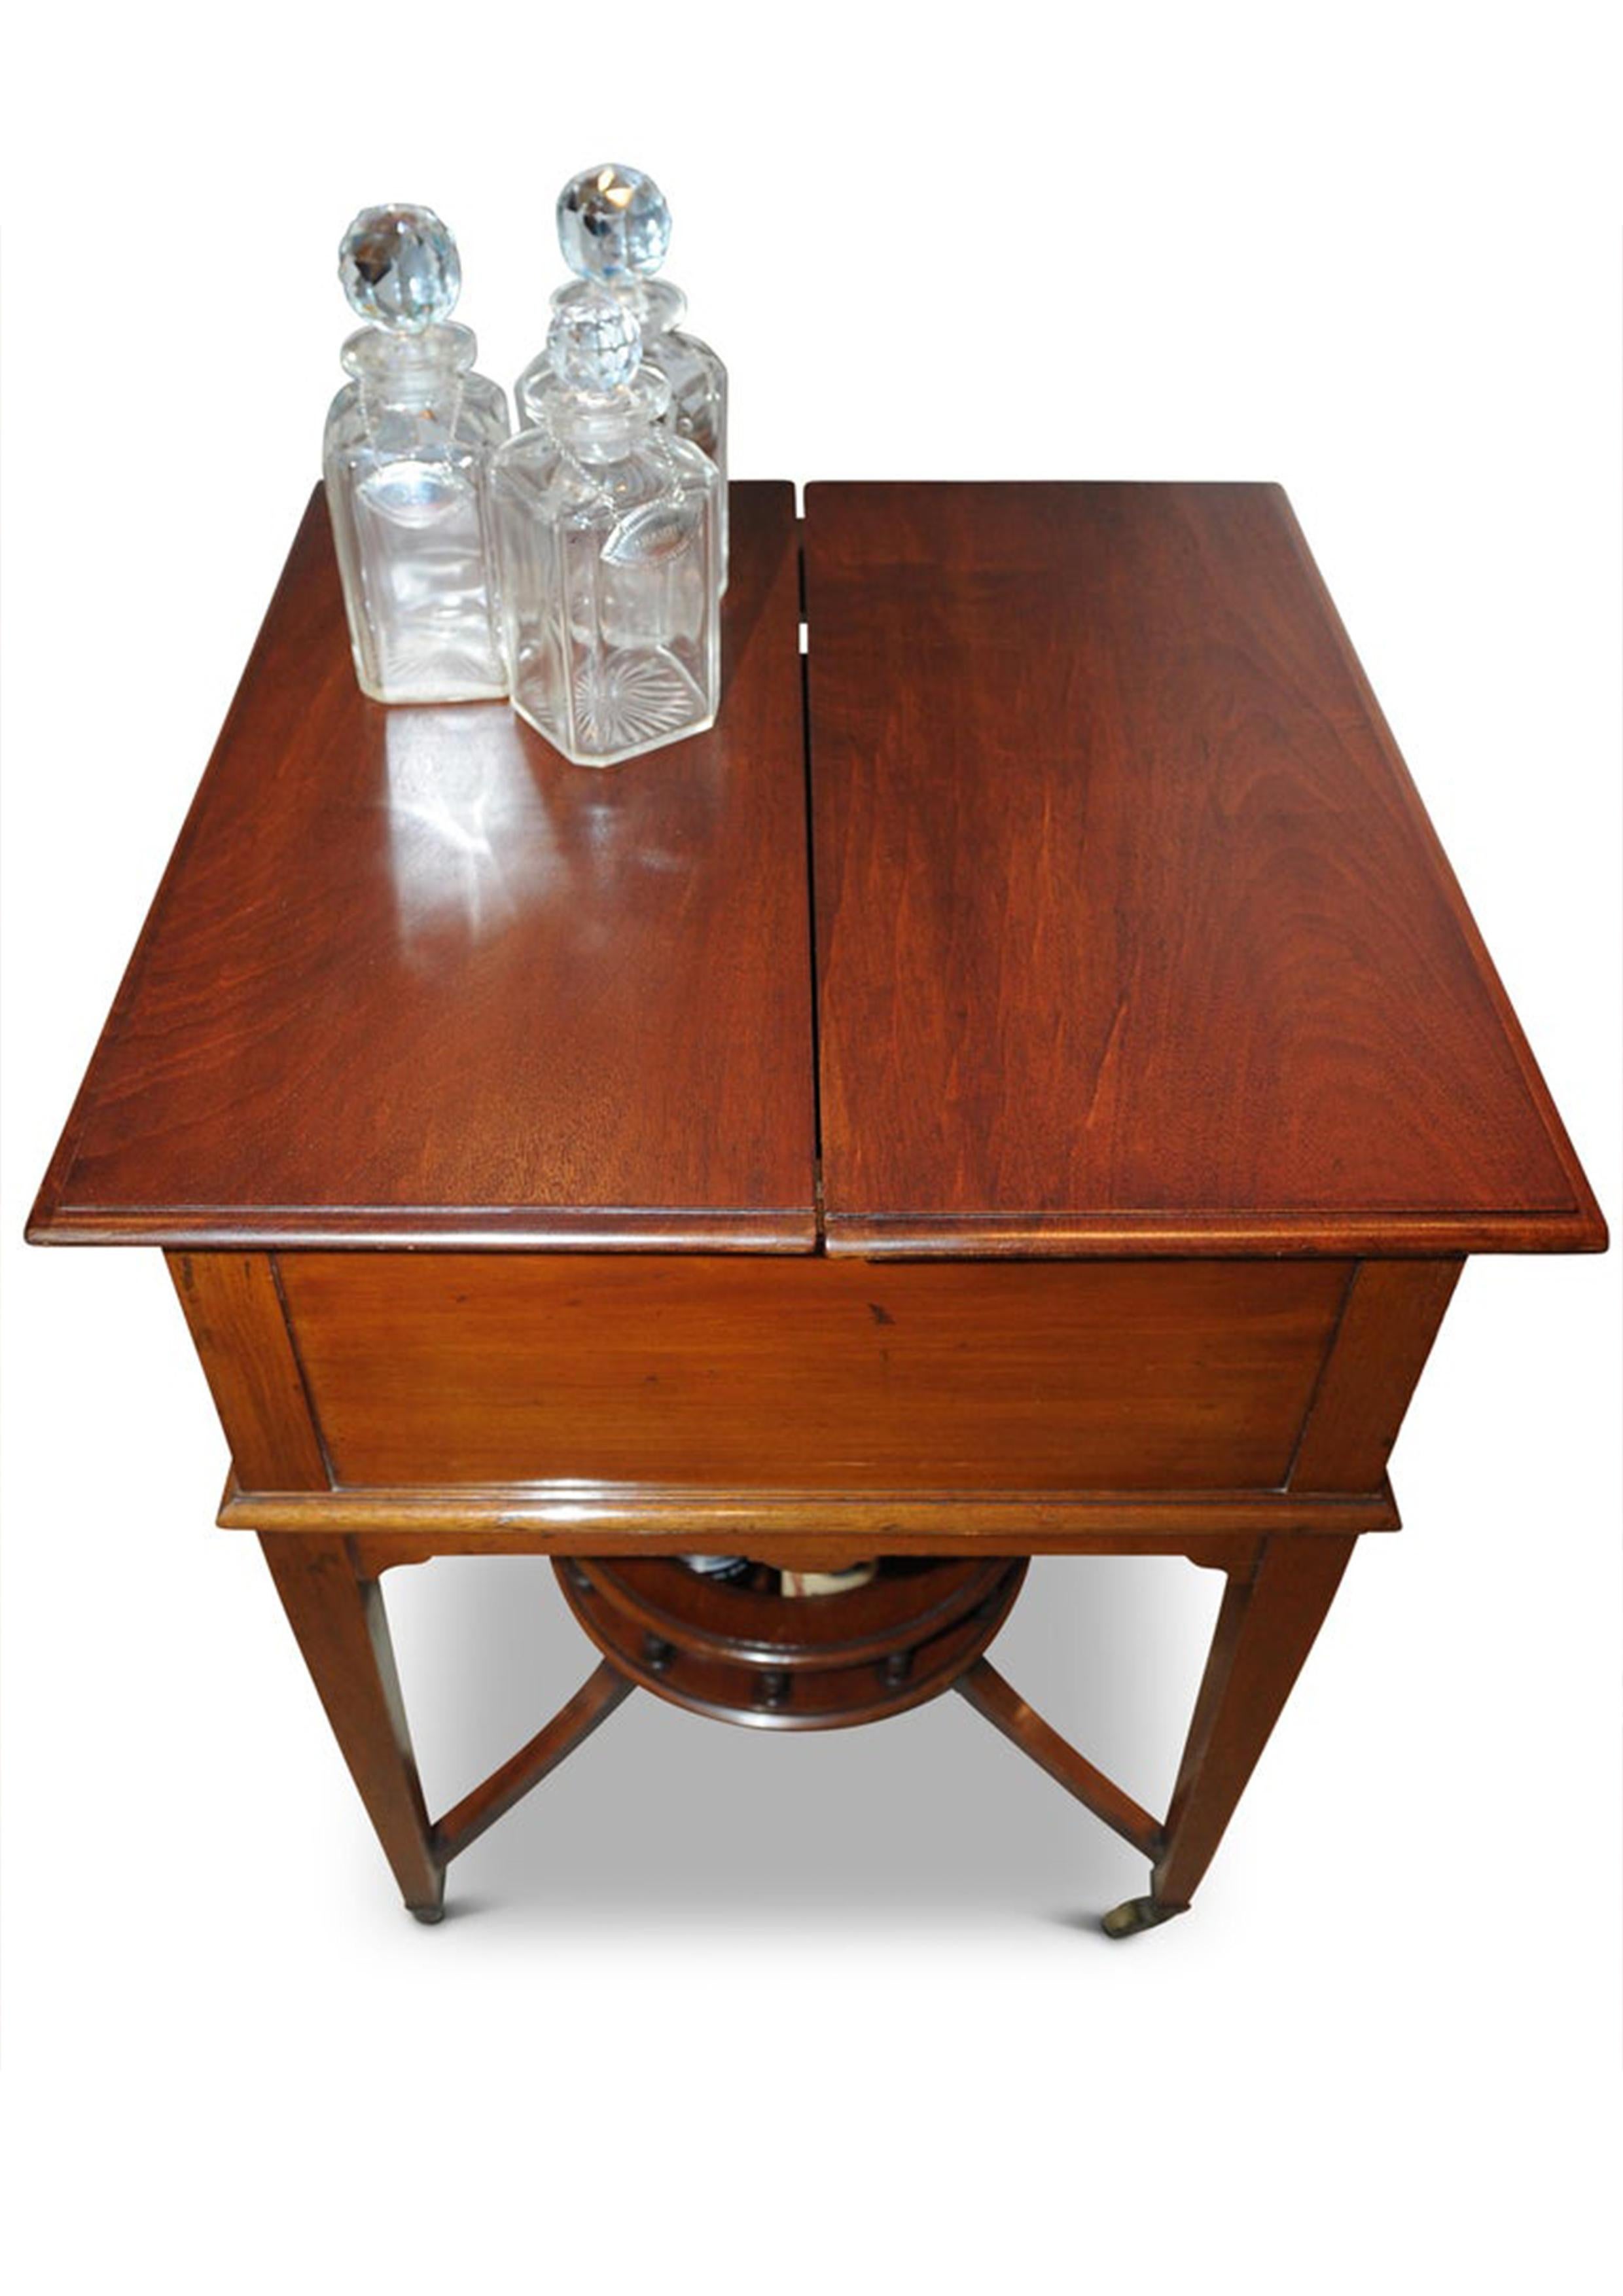 Edwardian Asprey & Co. London 1920s Mahogany Pop Up Dry Bar Drinks Cabinet and Decanters